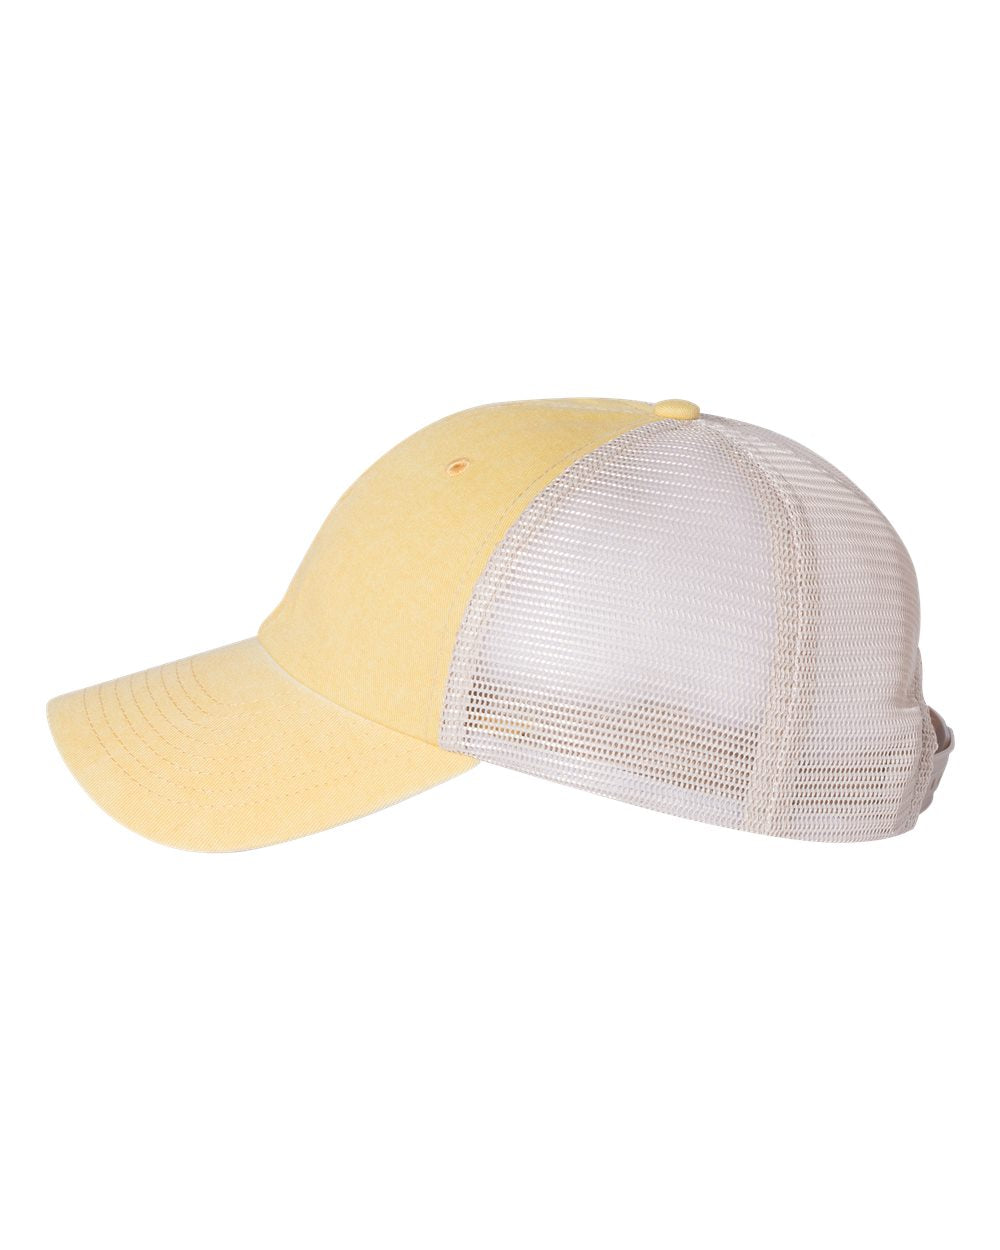 Sportsman Pigment-Dyed Trucker Cap SP510 #color_Mustard Yellow/ Stone